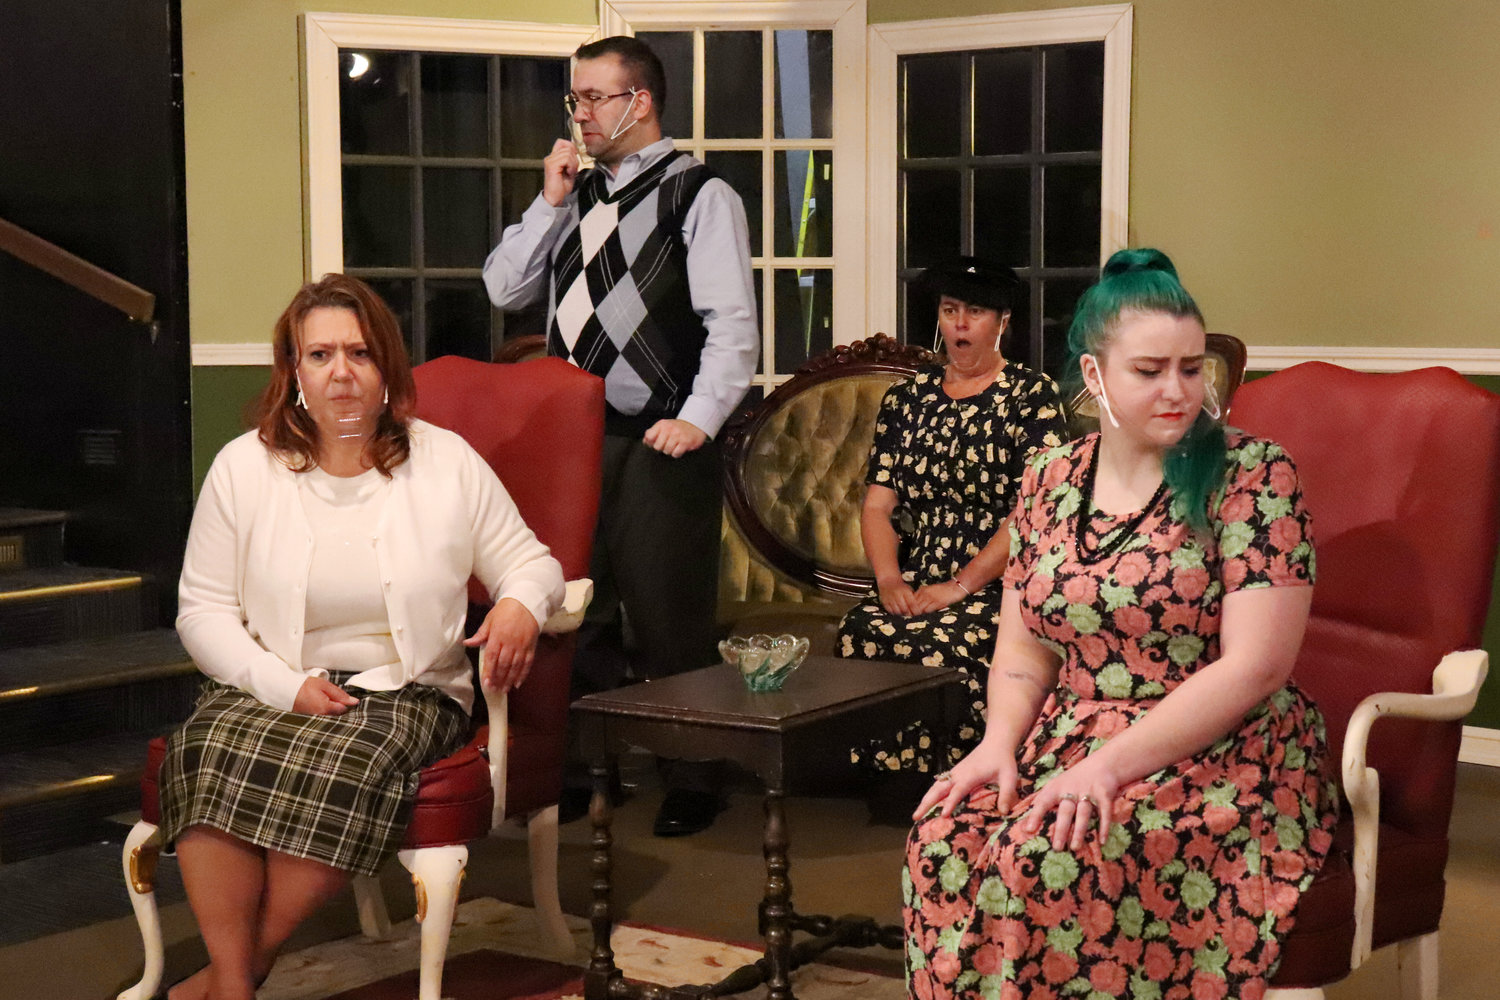 From left, Michelle Koenen as Letitia Blacklock, Tim Donnell as Edward Swettenham, Nichole Galyean as Mrs. Swettenham and Brittany Wilcox as Phillipa Haymes perform on stage during a rehearsal of “A Murder is Announced” at Evergreen Playhouse last week.